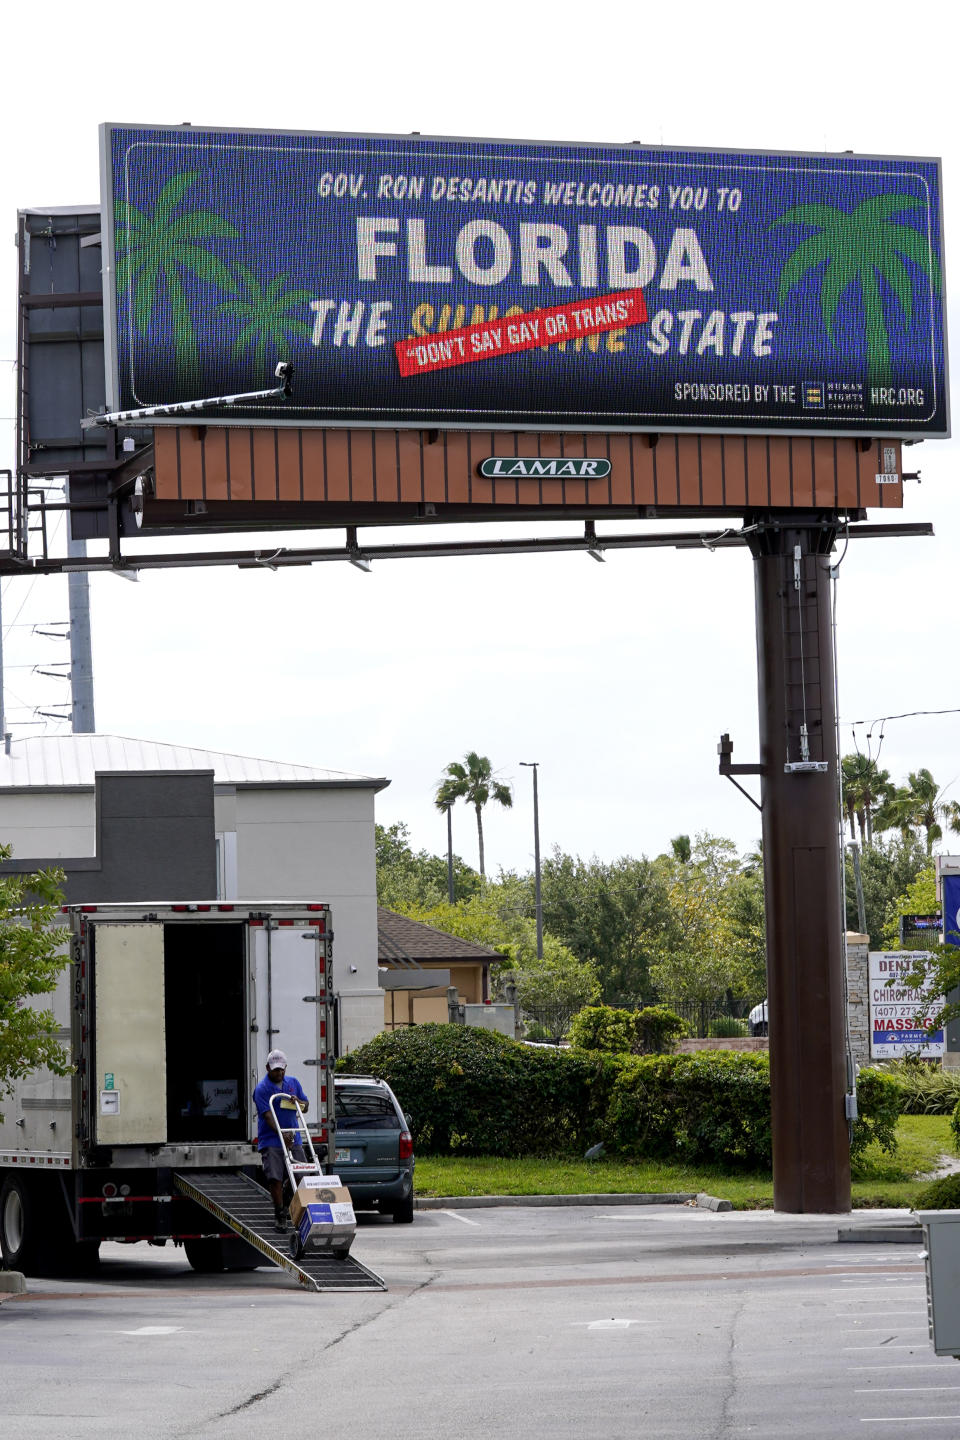 FILE - A new billboard welcoming visitors to "Florida: The Sunshine 'Don't Say Gay or Trans' State. is displayed April 21, 2022, in Orlando, Fla. The Florida Legislature has passed a bill to dissolve a private government controlled by Disney that provides municipal-like services for its 27,000 acres in the Sunshine State. The proposal has been pushed by Republican Gov. Ron DeSantis, and is largely viewed as retribution for Disney’s criticism of a new state law that bars instruction on sexual orientation and gender identity in kindergarten through third grade. (AP Photo/John Raoux, File)